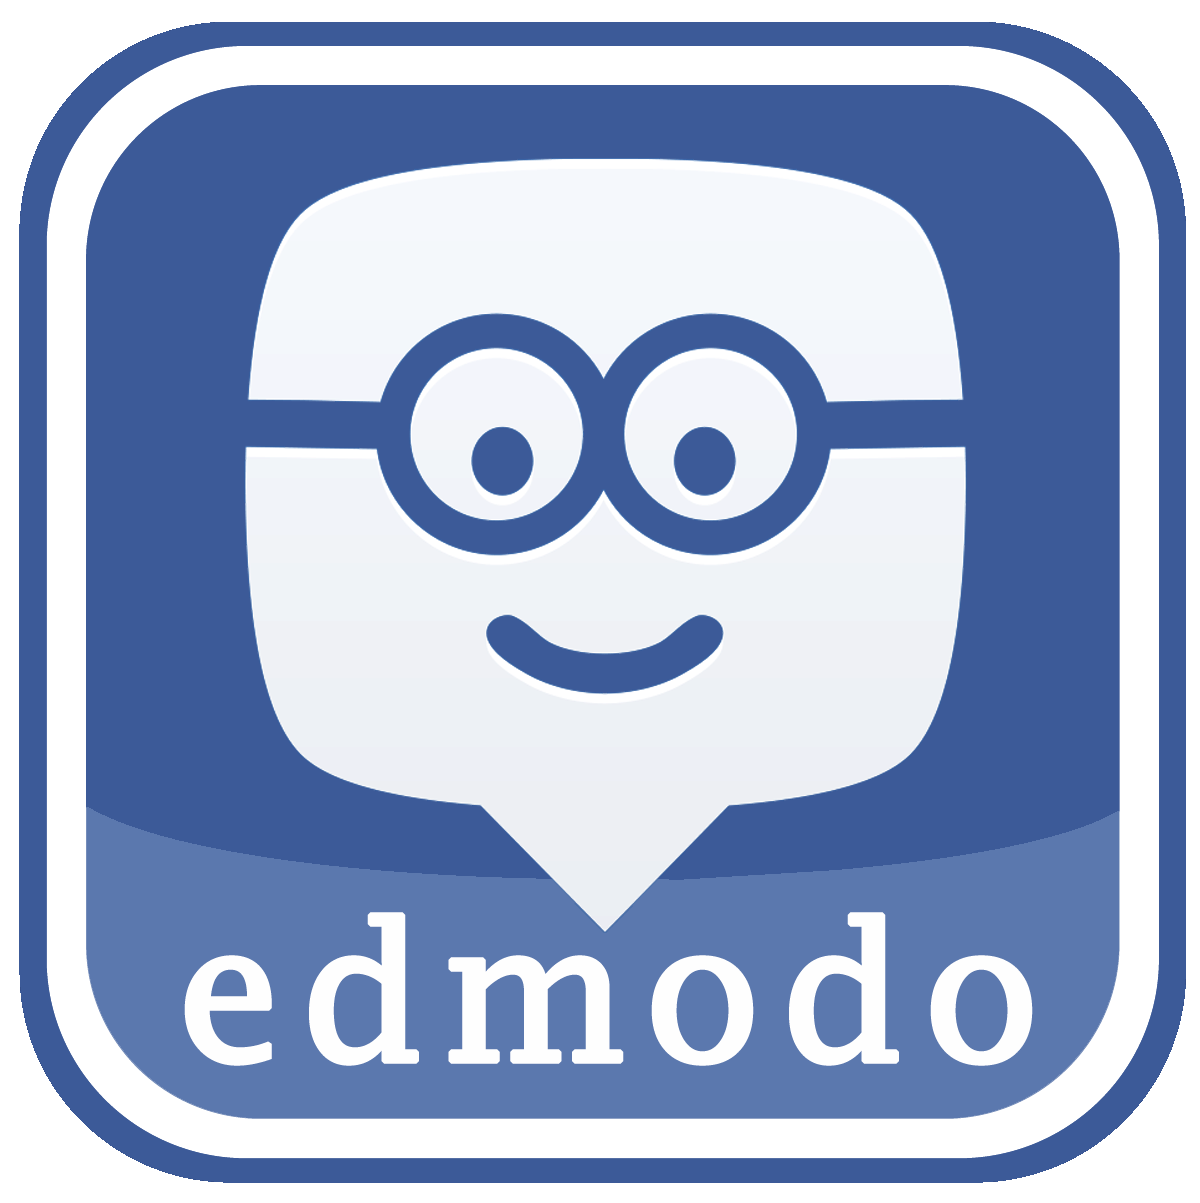 15 Things to do With Your Kids on EdModo